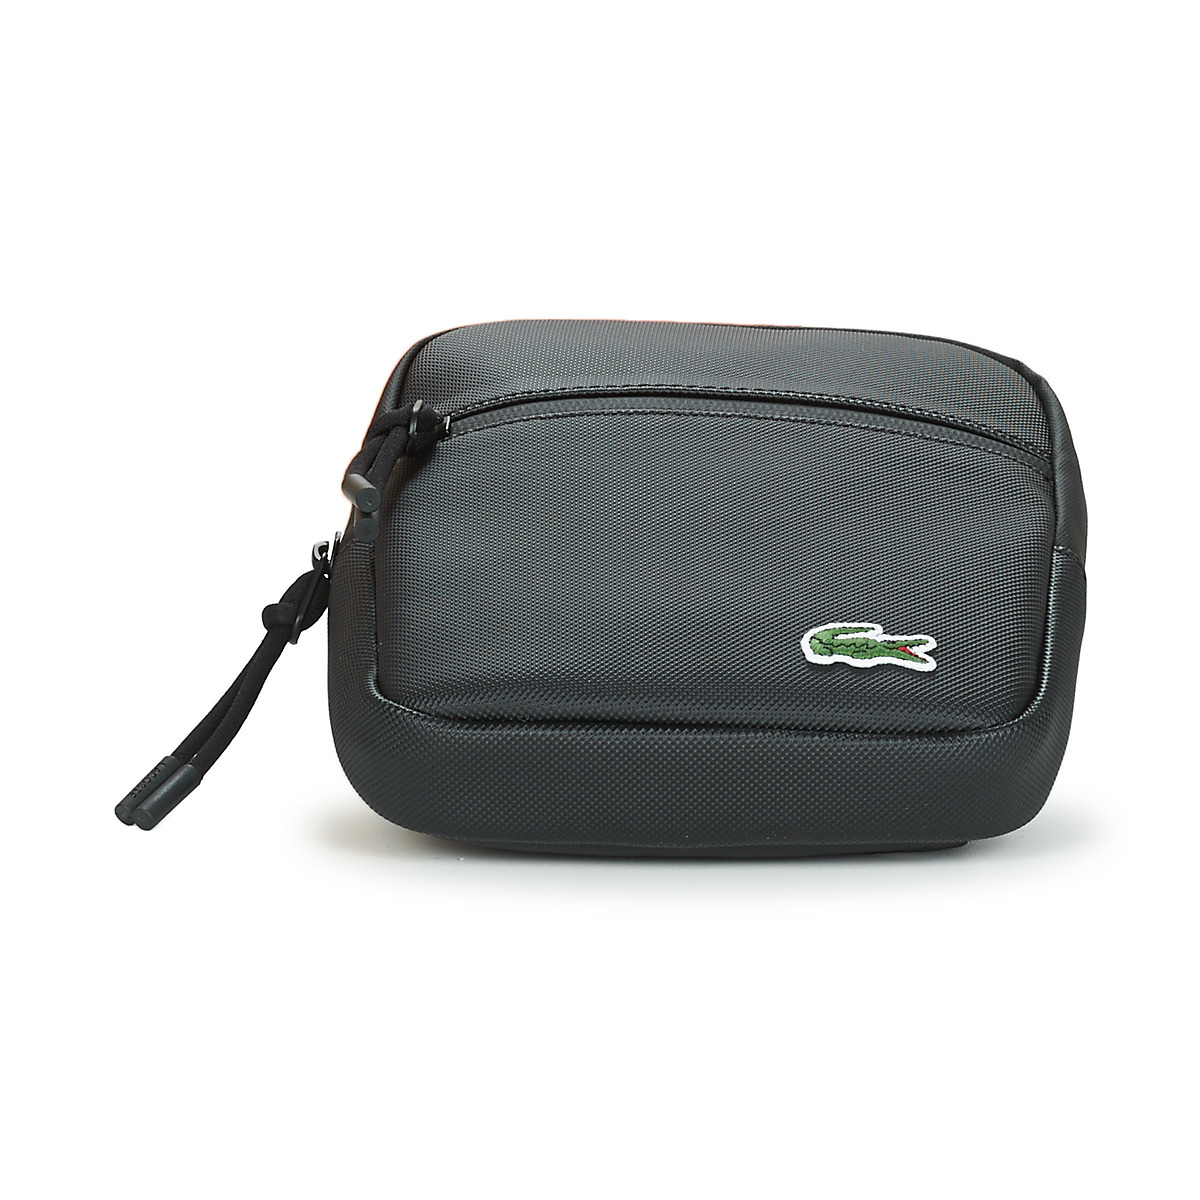 Lacoste Noir LCST SMALL MfqGbs9W